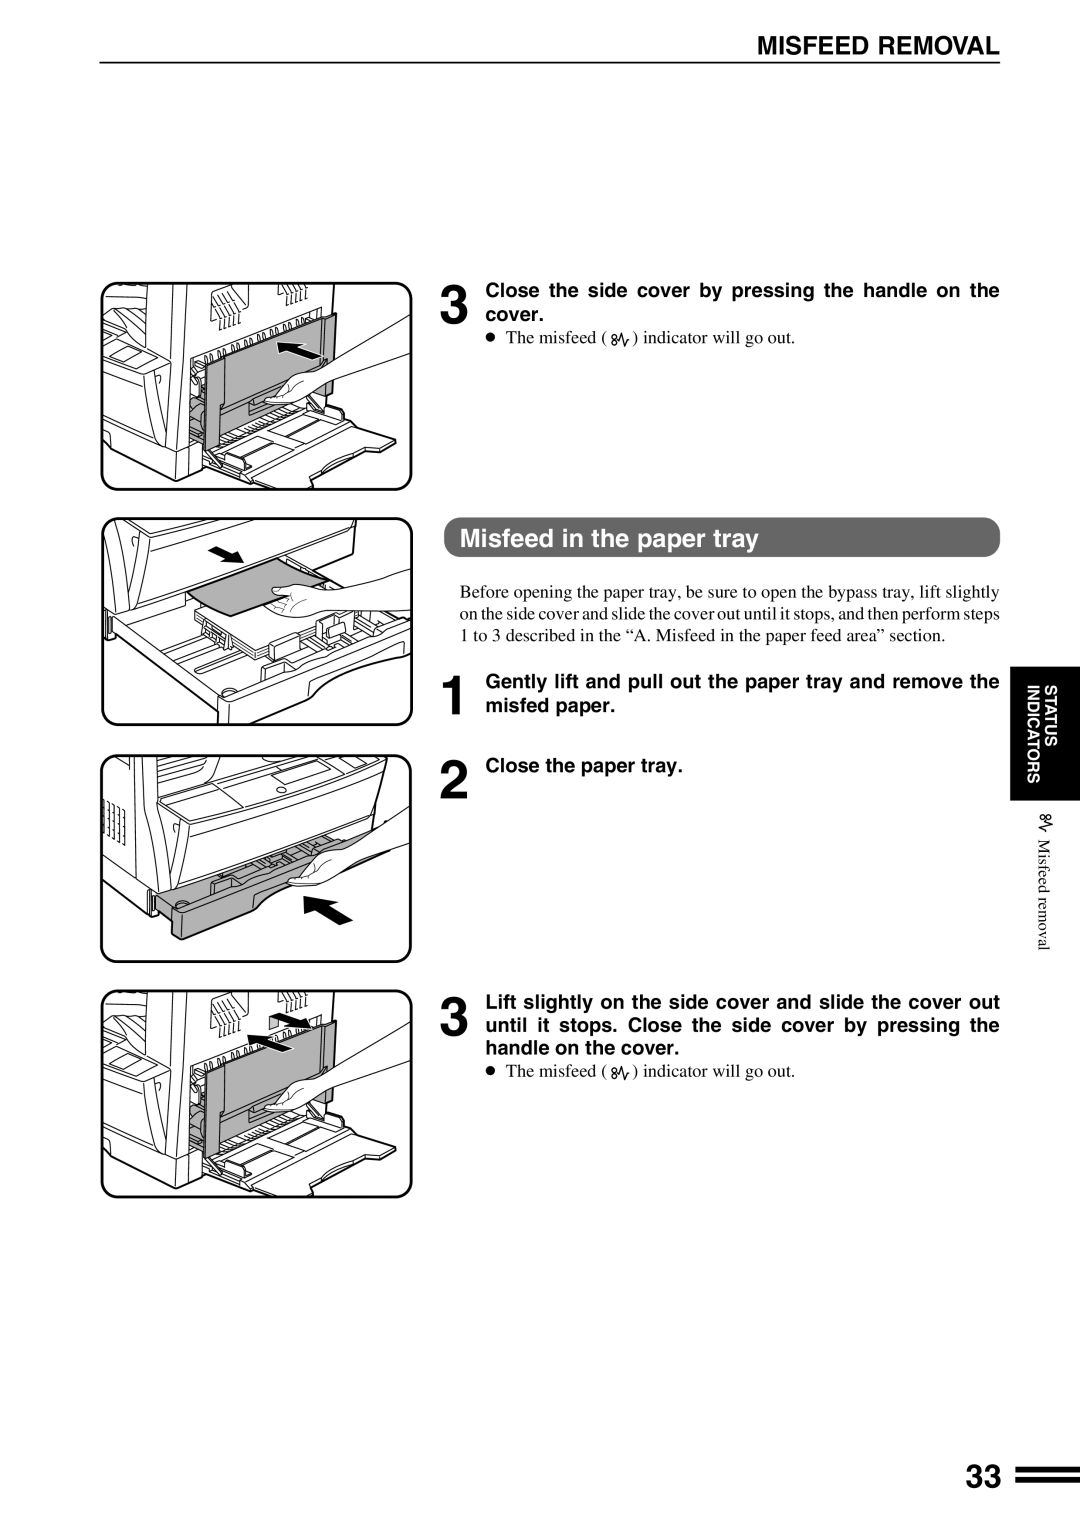 Sharp AR-162S Misfeed in the paper tray, Close the side cover by pressing the handle on the 3 cover, Close the paper tray 